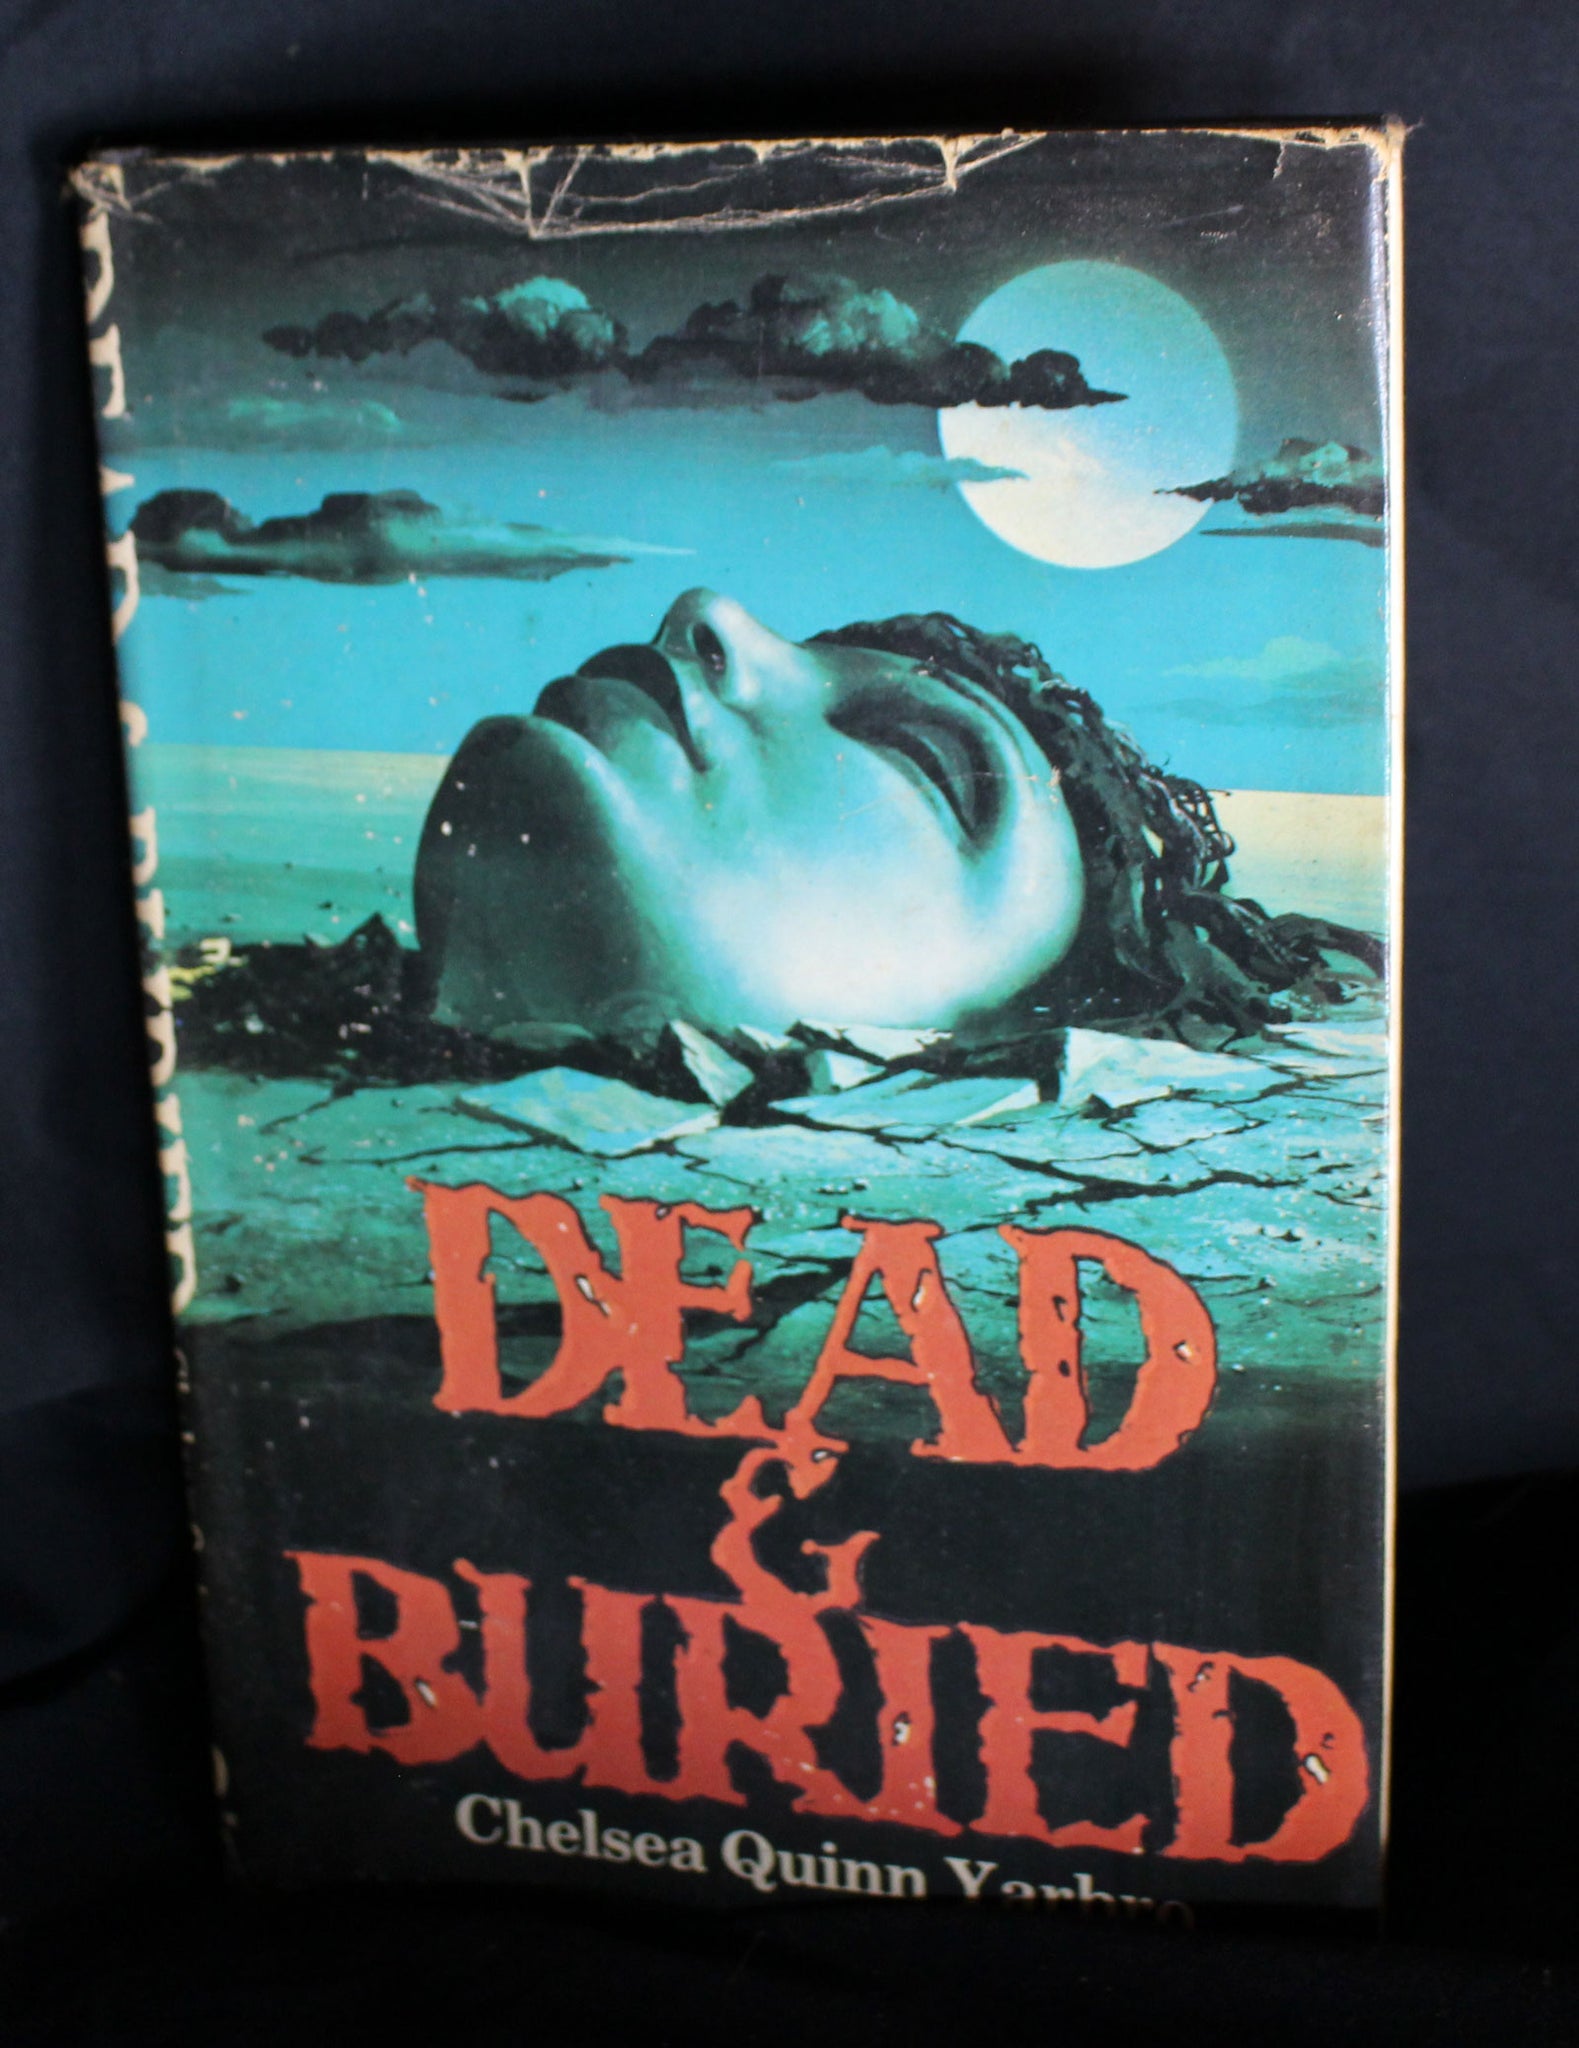 Hardcover First Edition Dead and Buried by Chelsea Quinn Yarbro, 1980